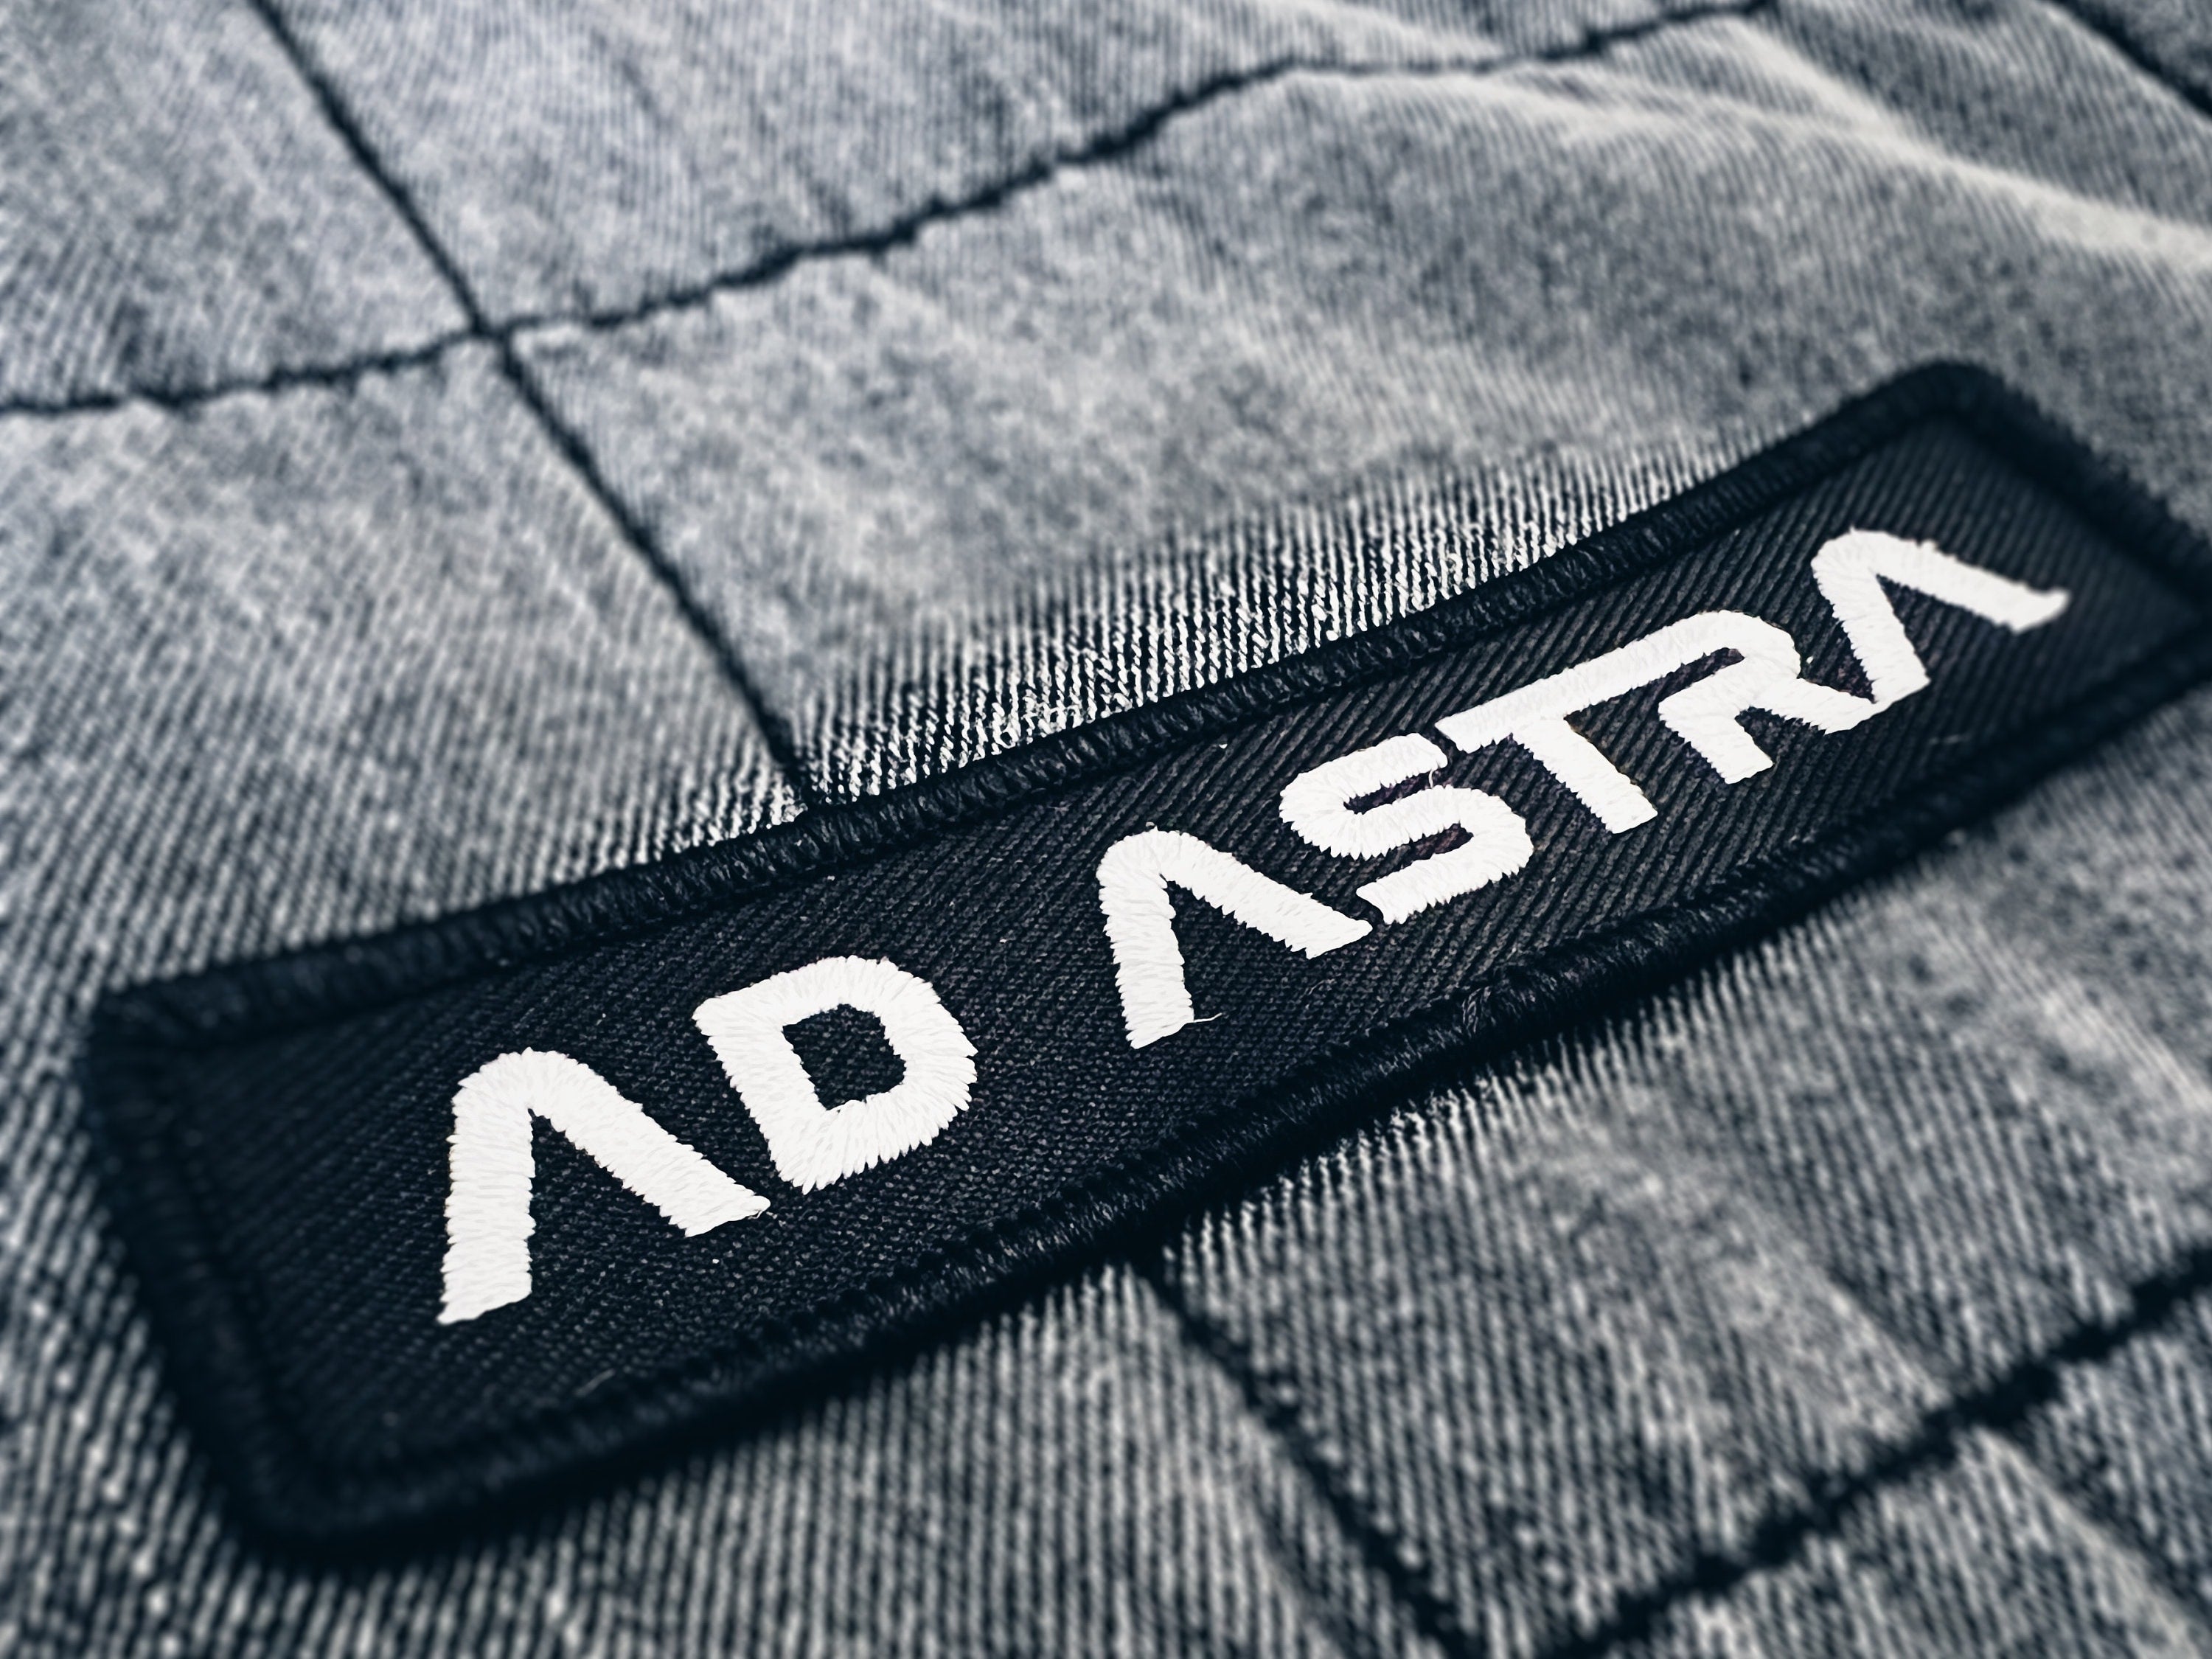 Ad Astra Embroidered Patch - EDC Futuristic Jacket Patches - Space Mission Patch